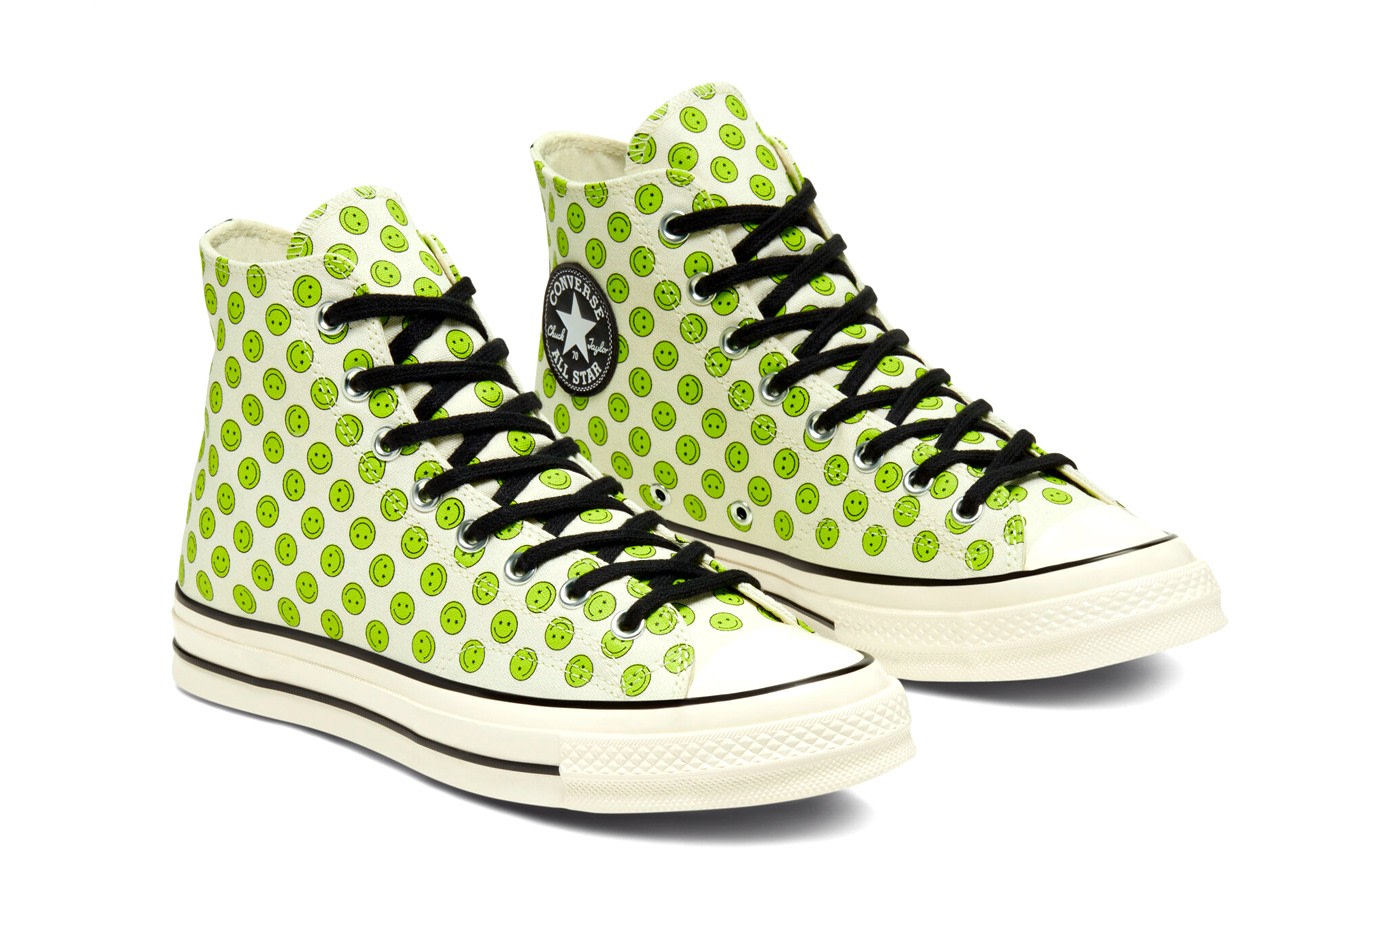 converse smiley face sneakers